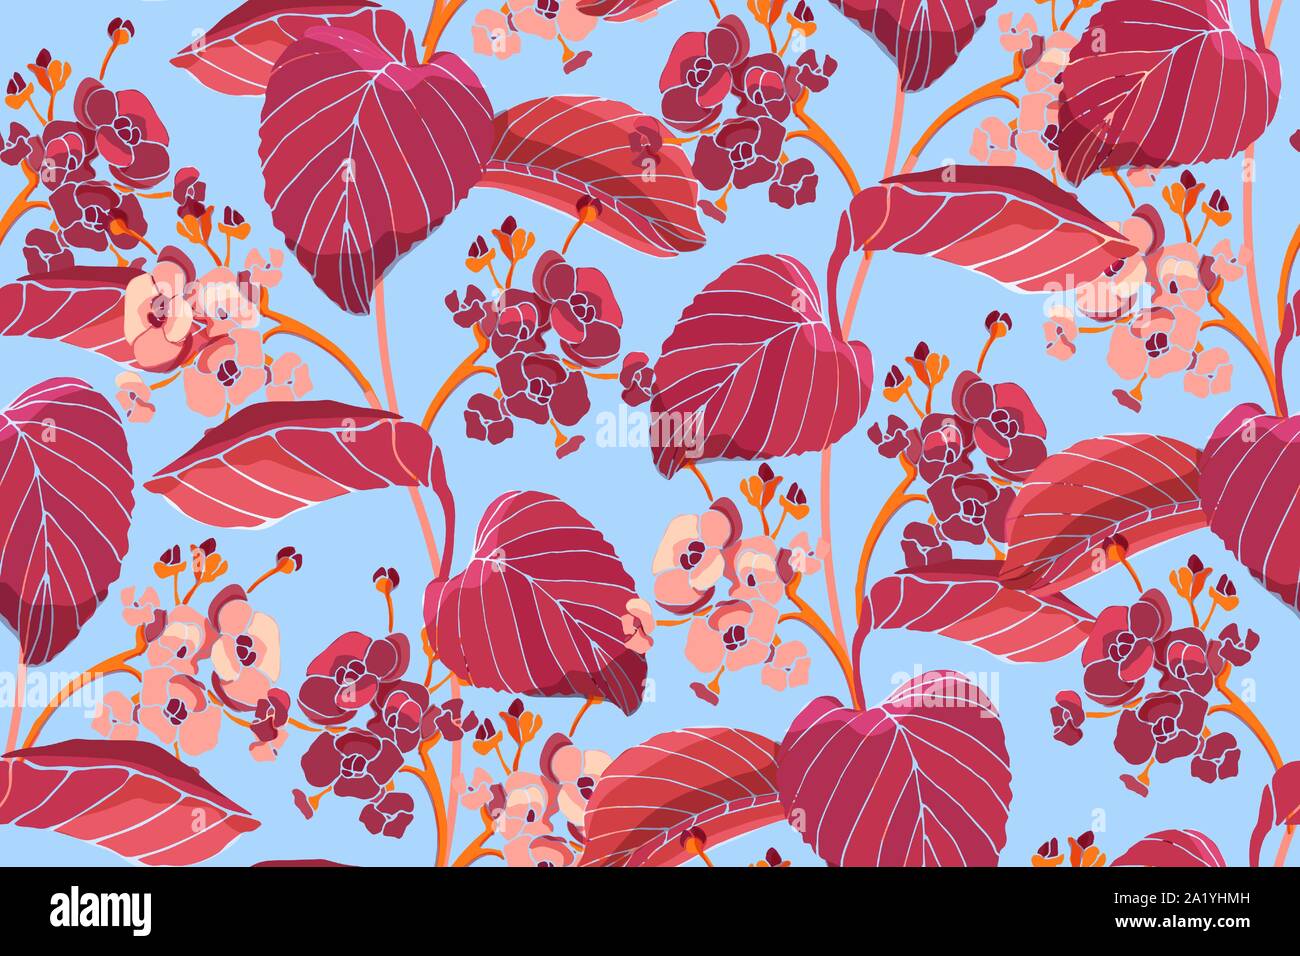 Art floral seamless pattern. Red autumn leaves. Stock Vector